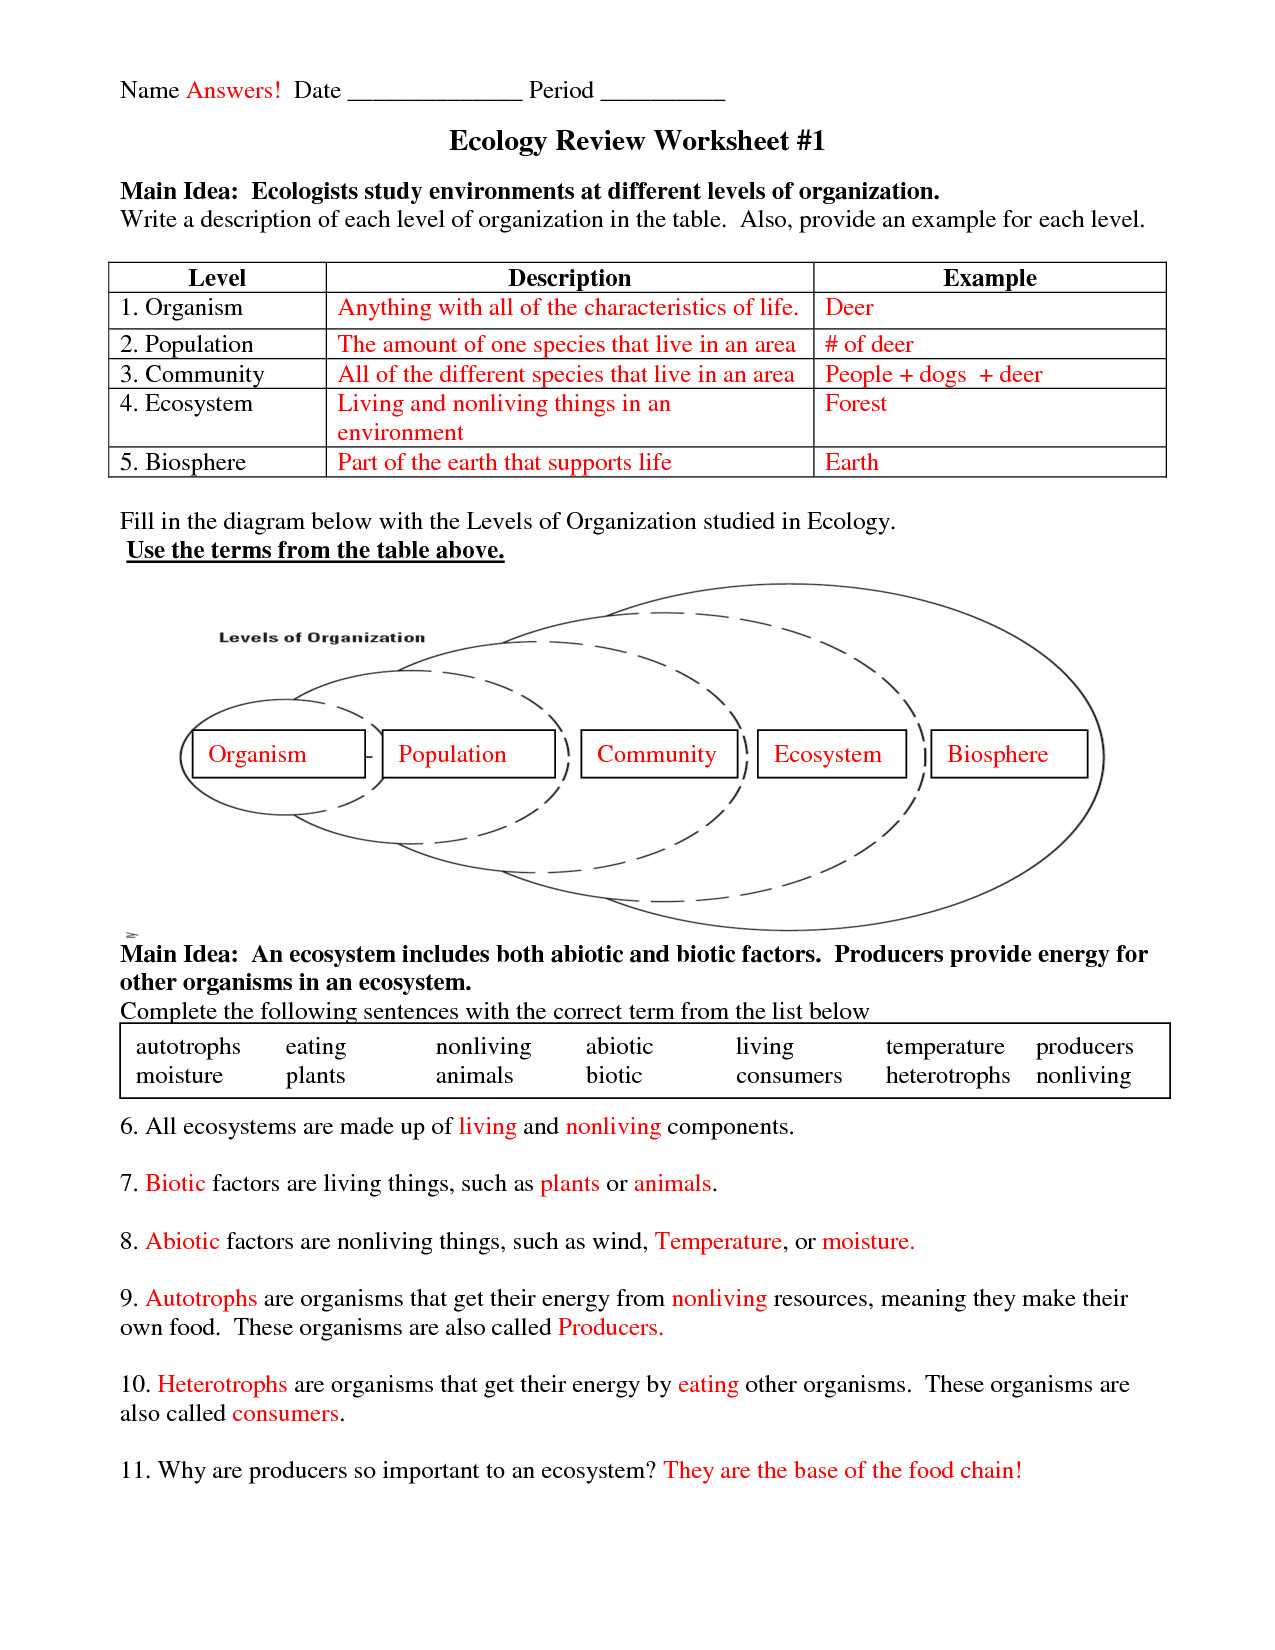 Wave Interactions Worksheet Answers and Species Interactions Worksheet Answers Awesome 24 Best Ecology